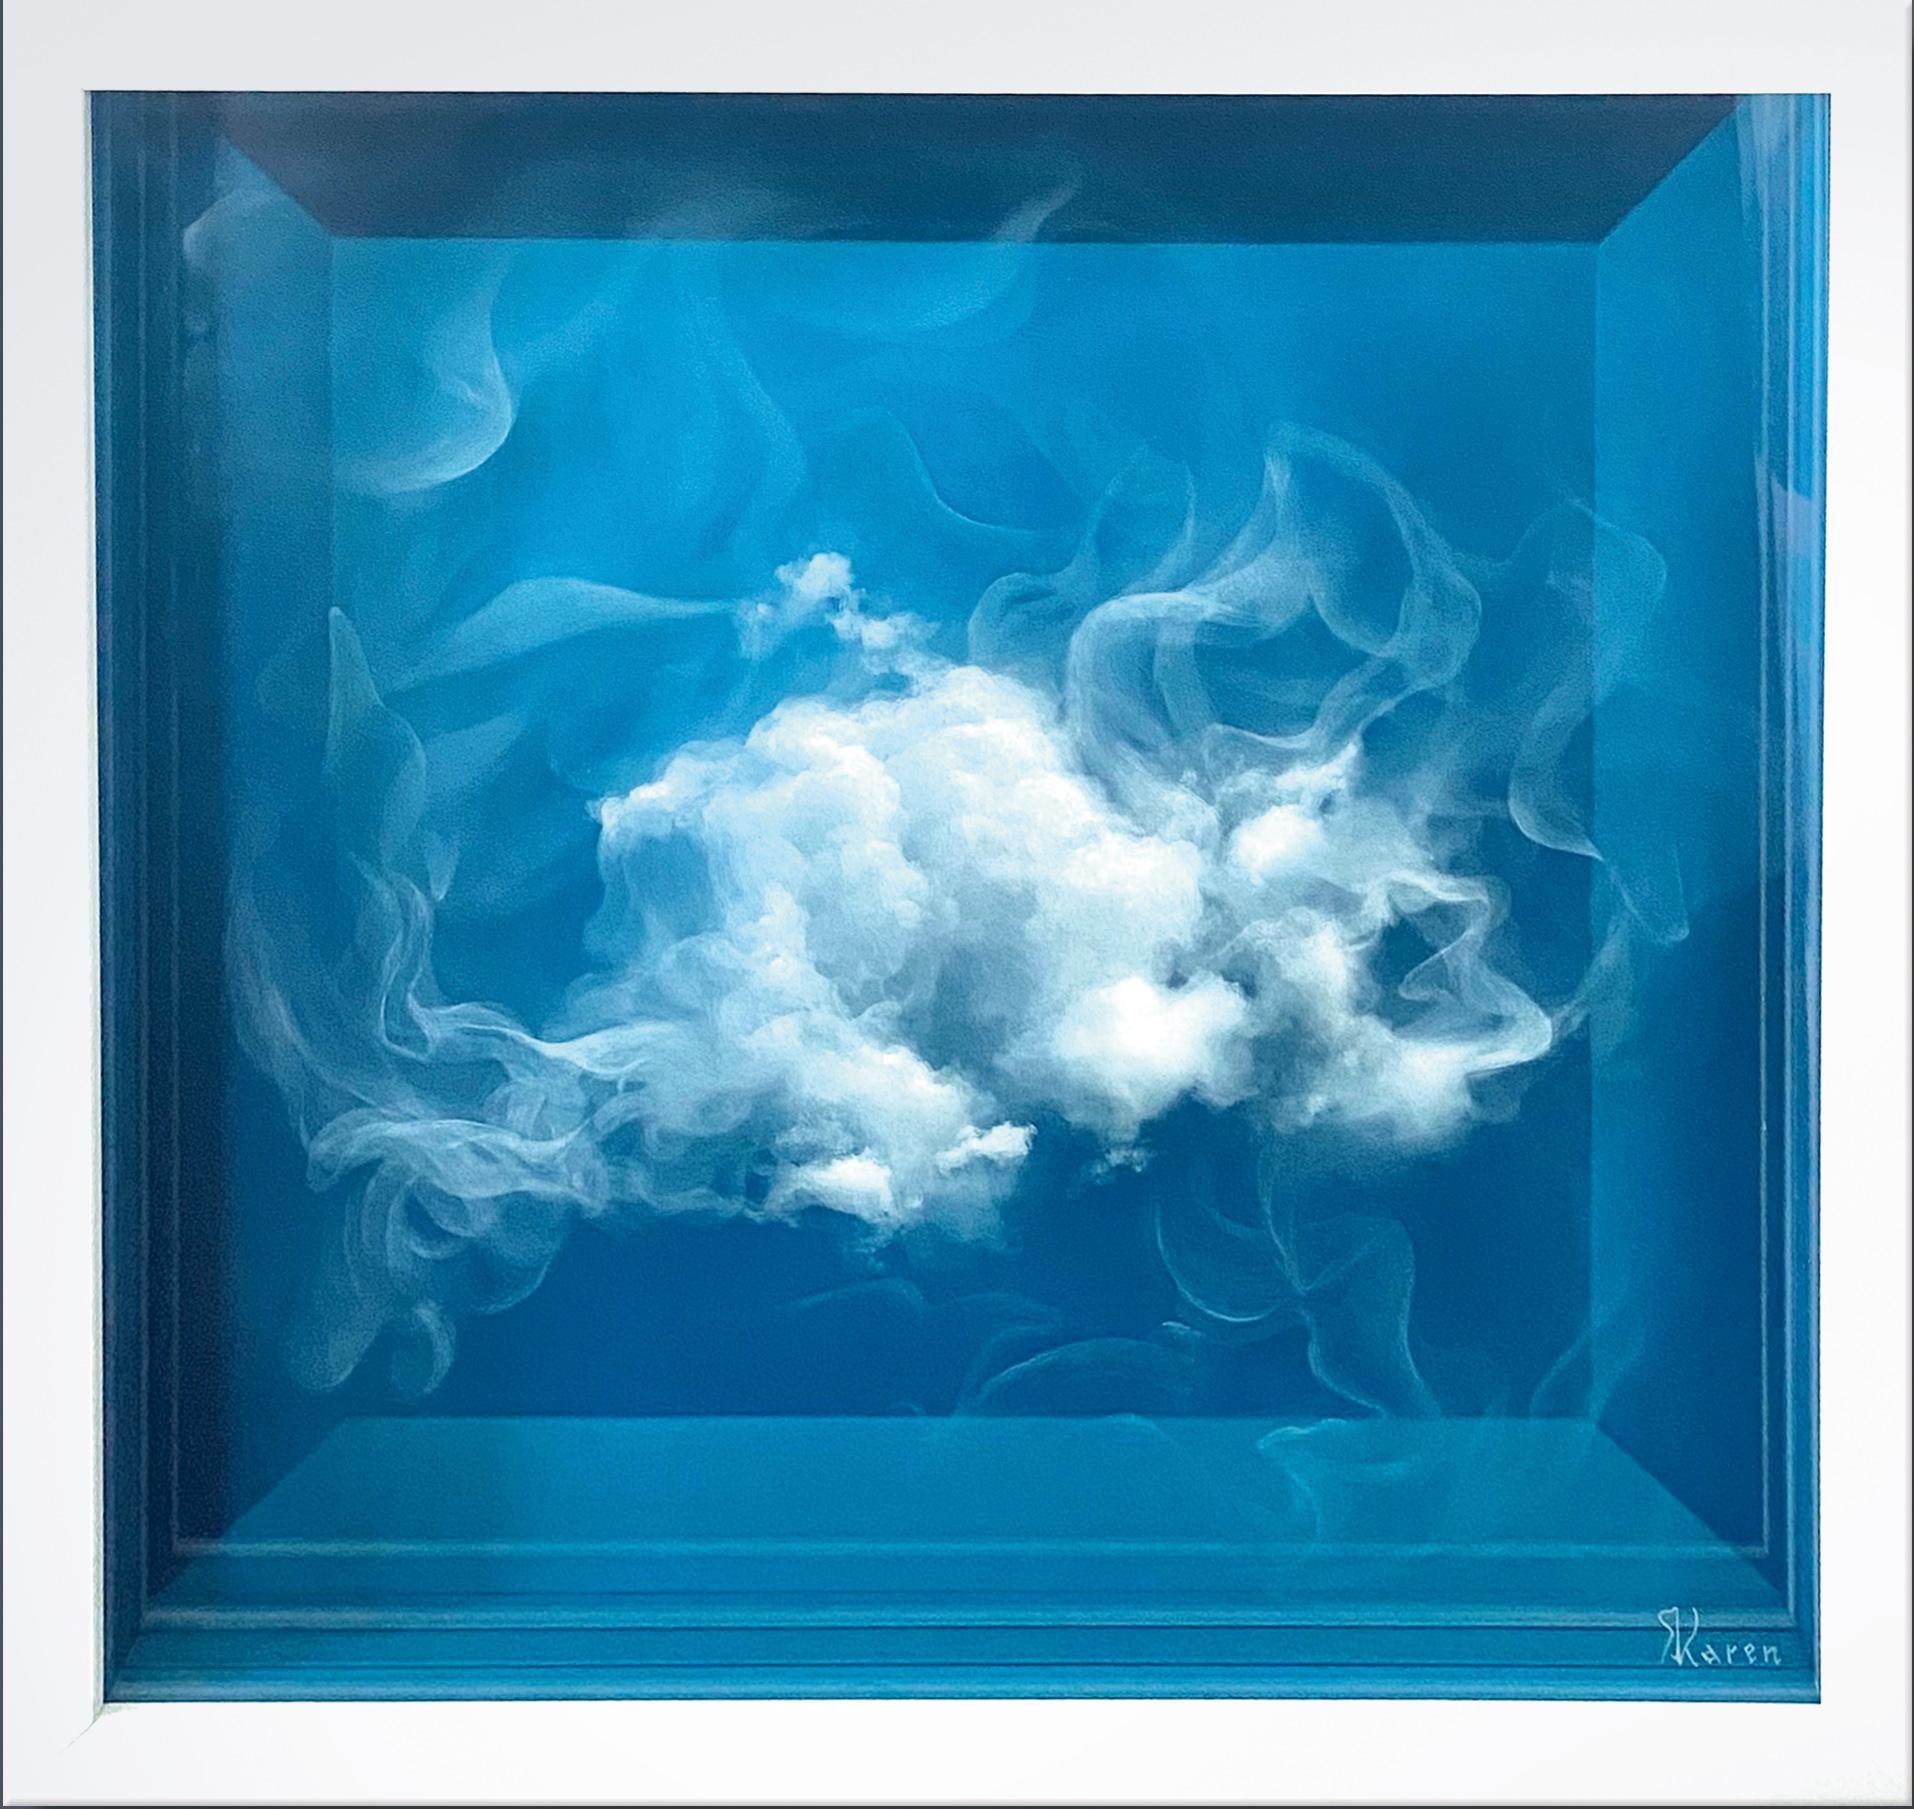 CLOUD IN GLASS, Oil on Glass